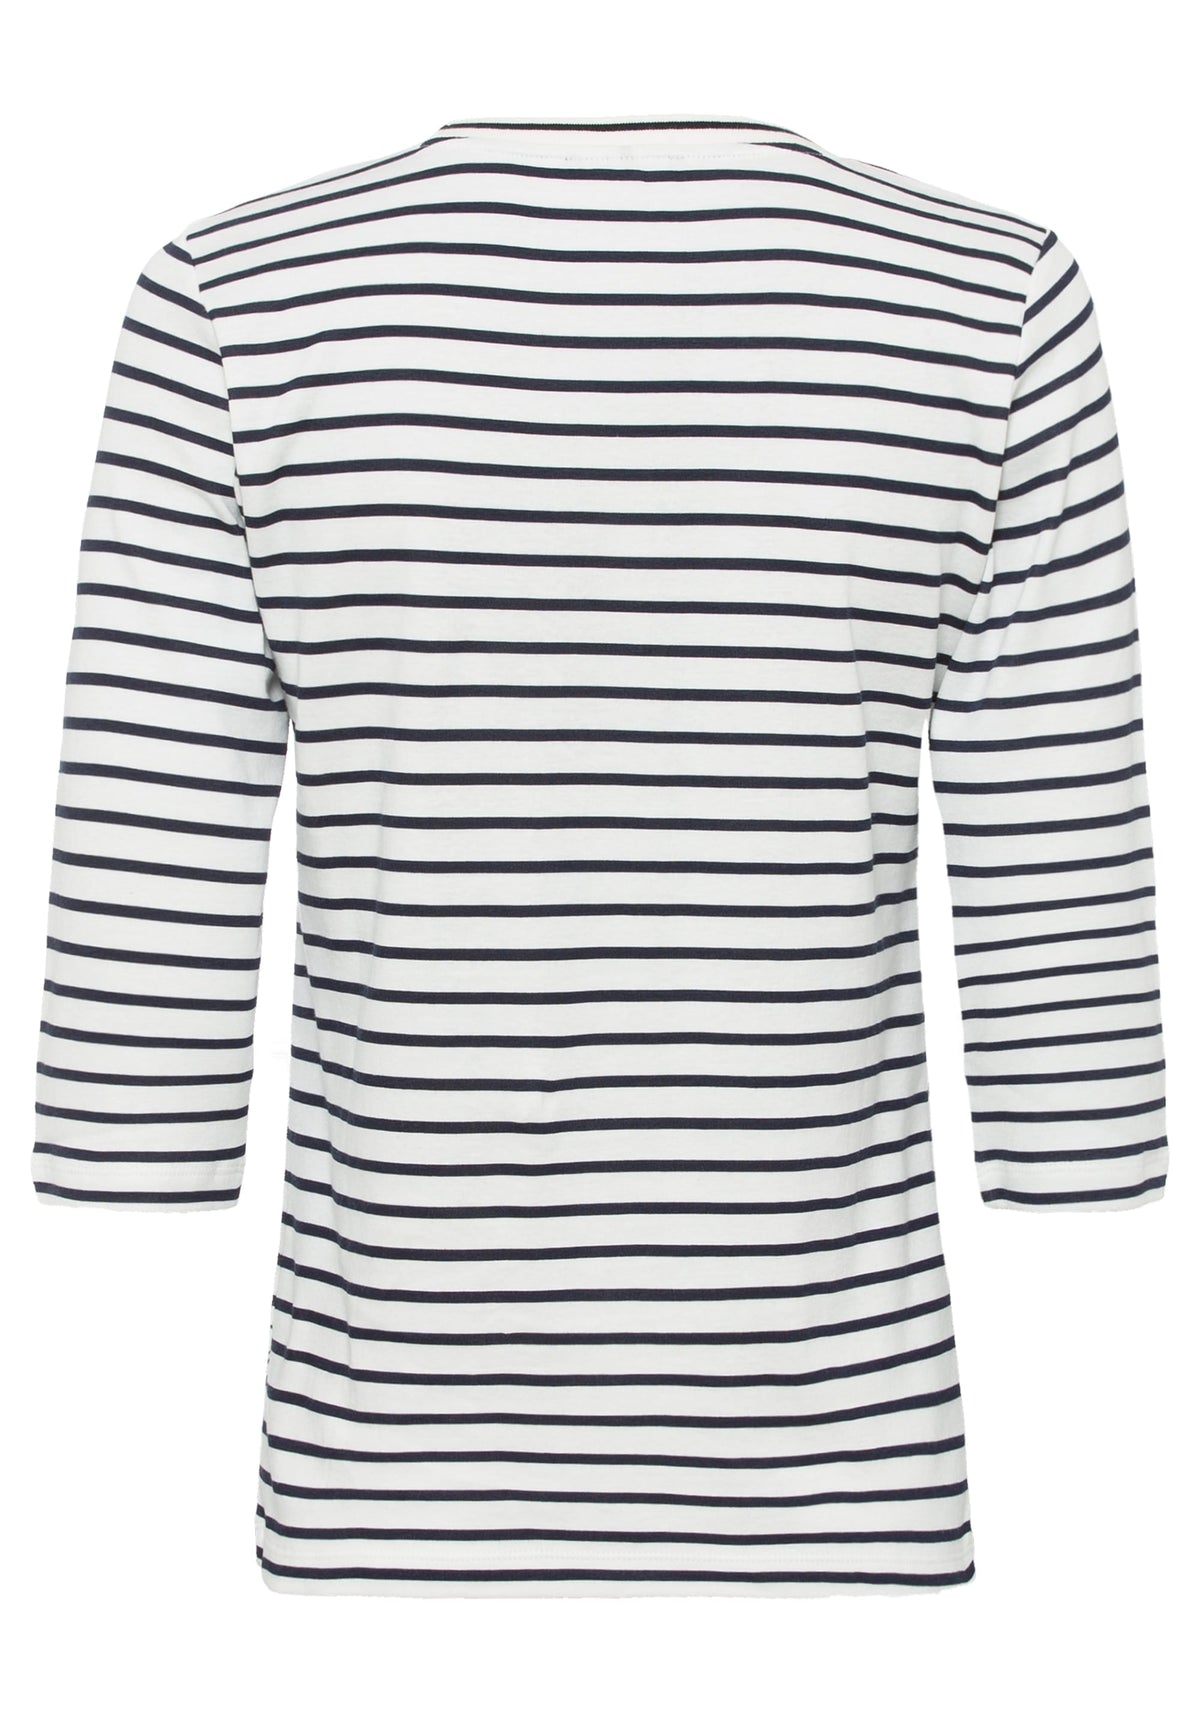 100% Cotton 3/4 Sleeve Stripe and Placement Print T-Shirt